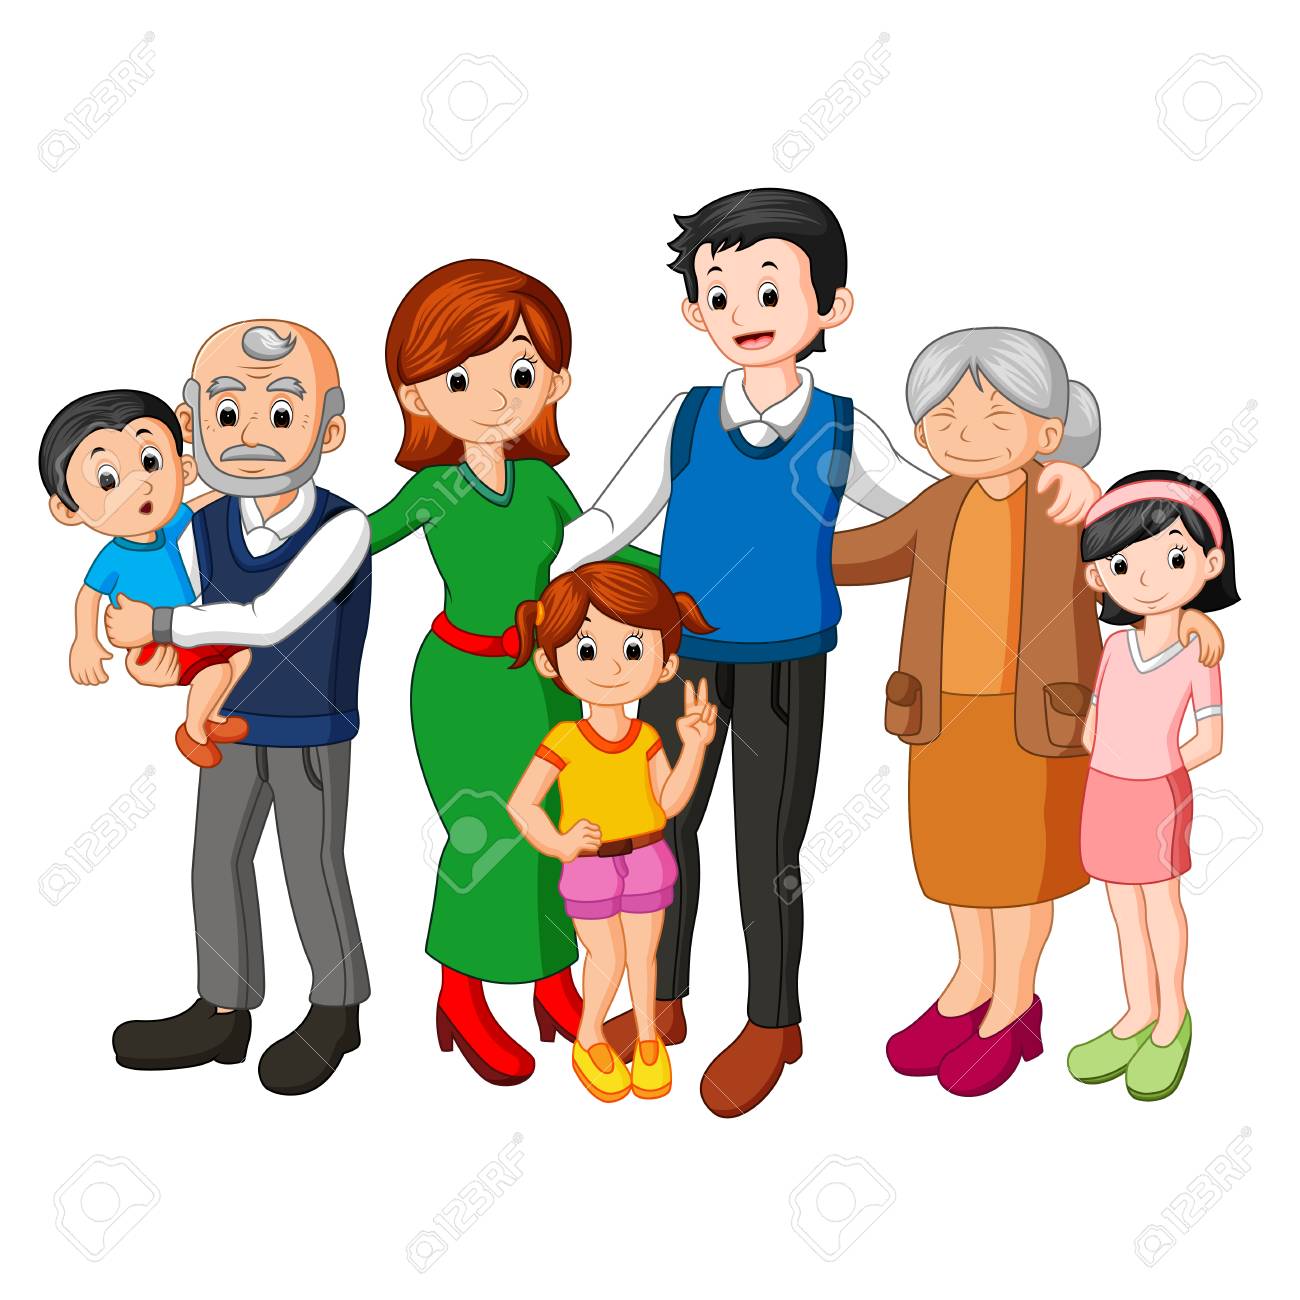 family clipart togetherness